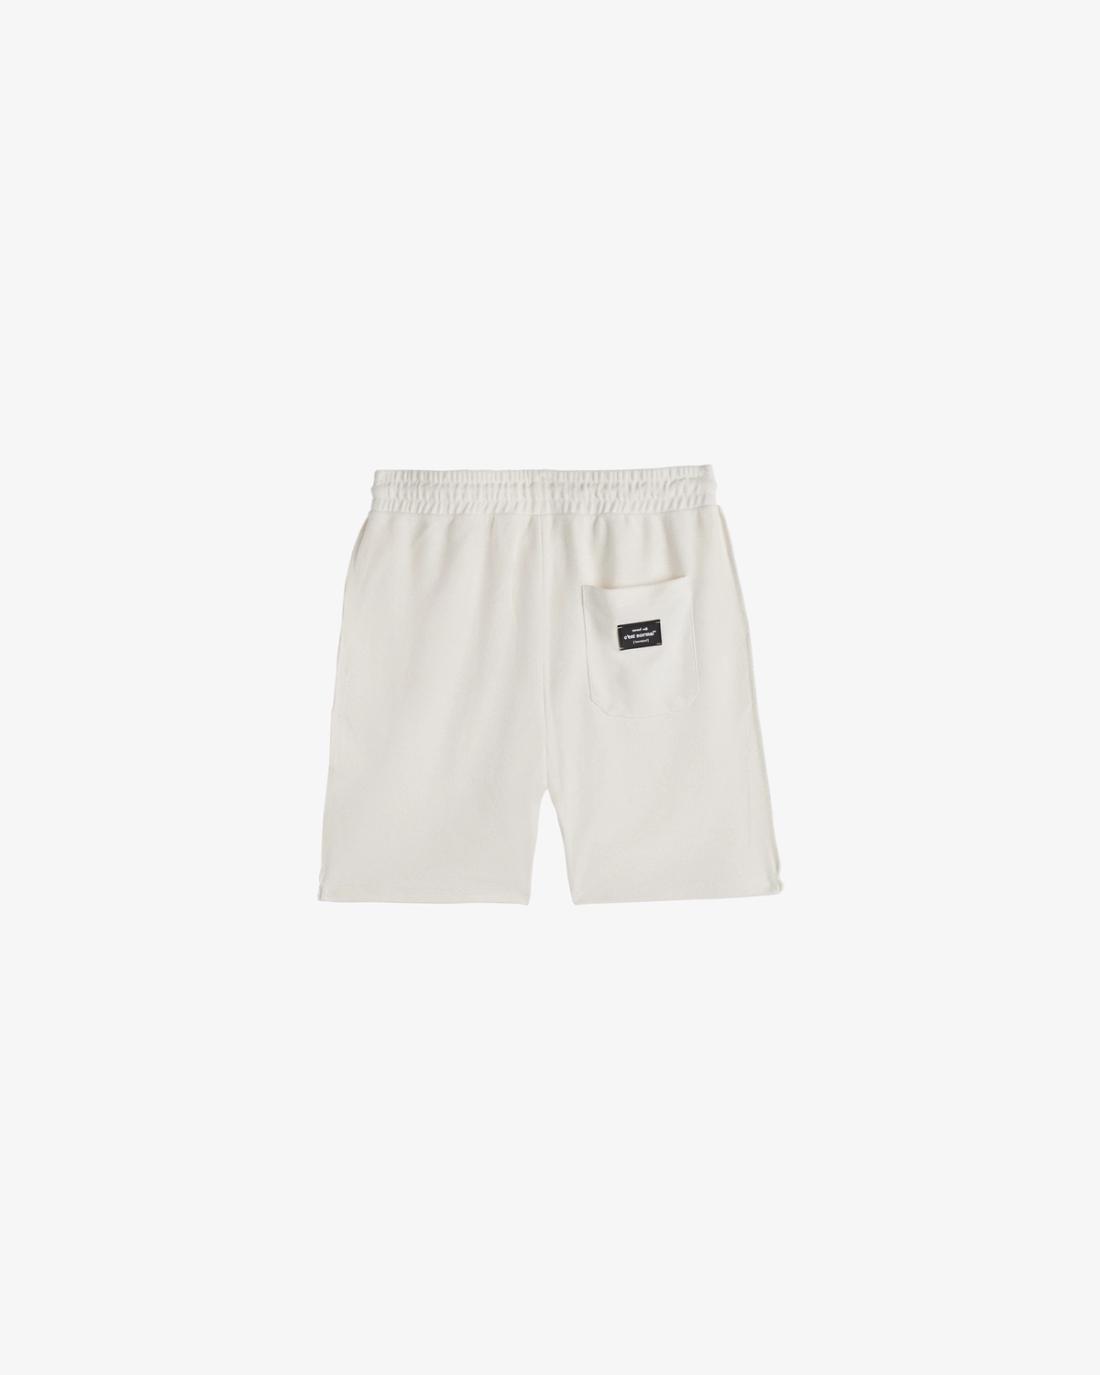 The Inside-Out Shorts